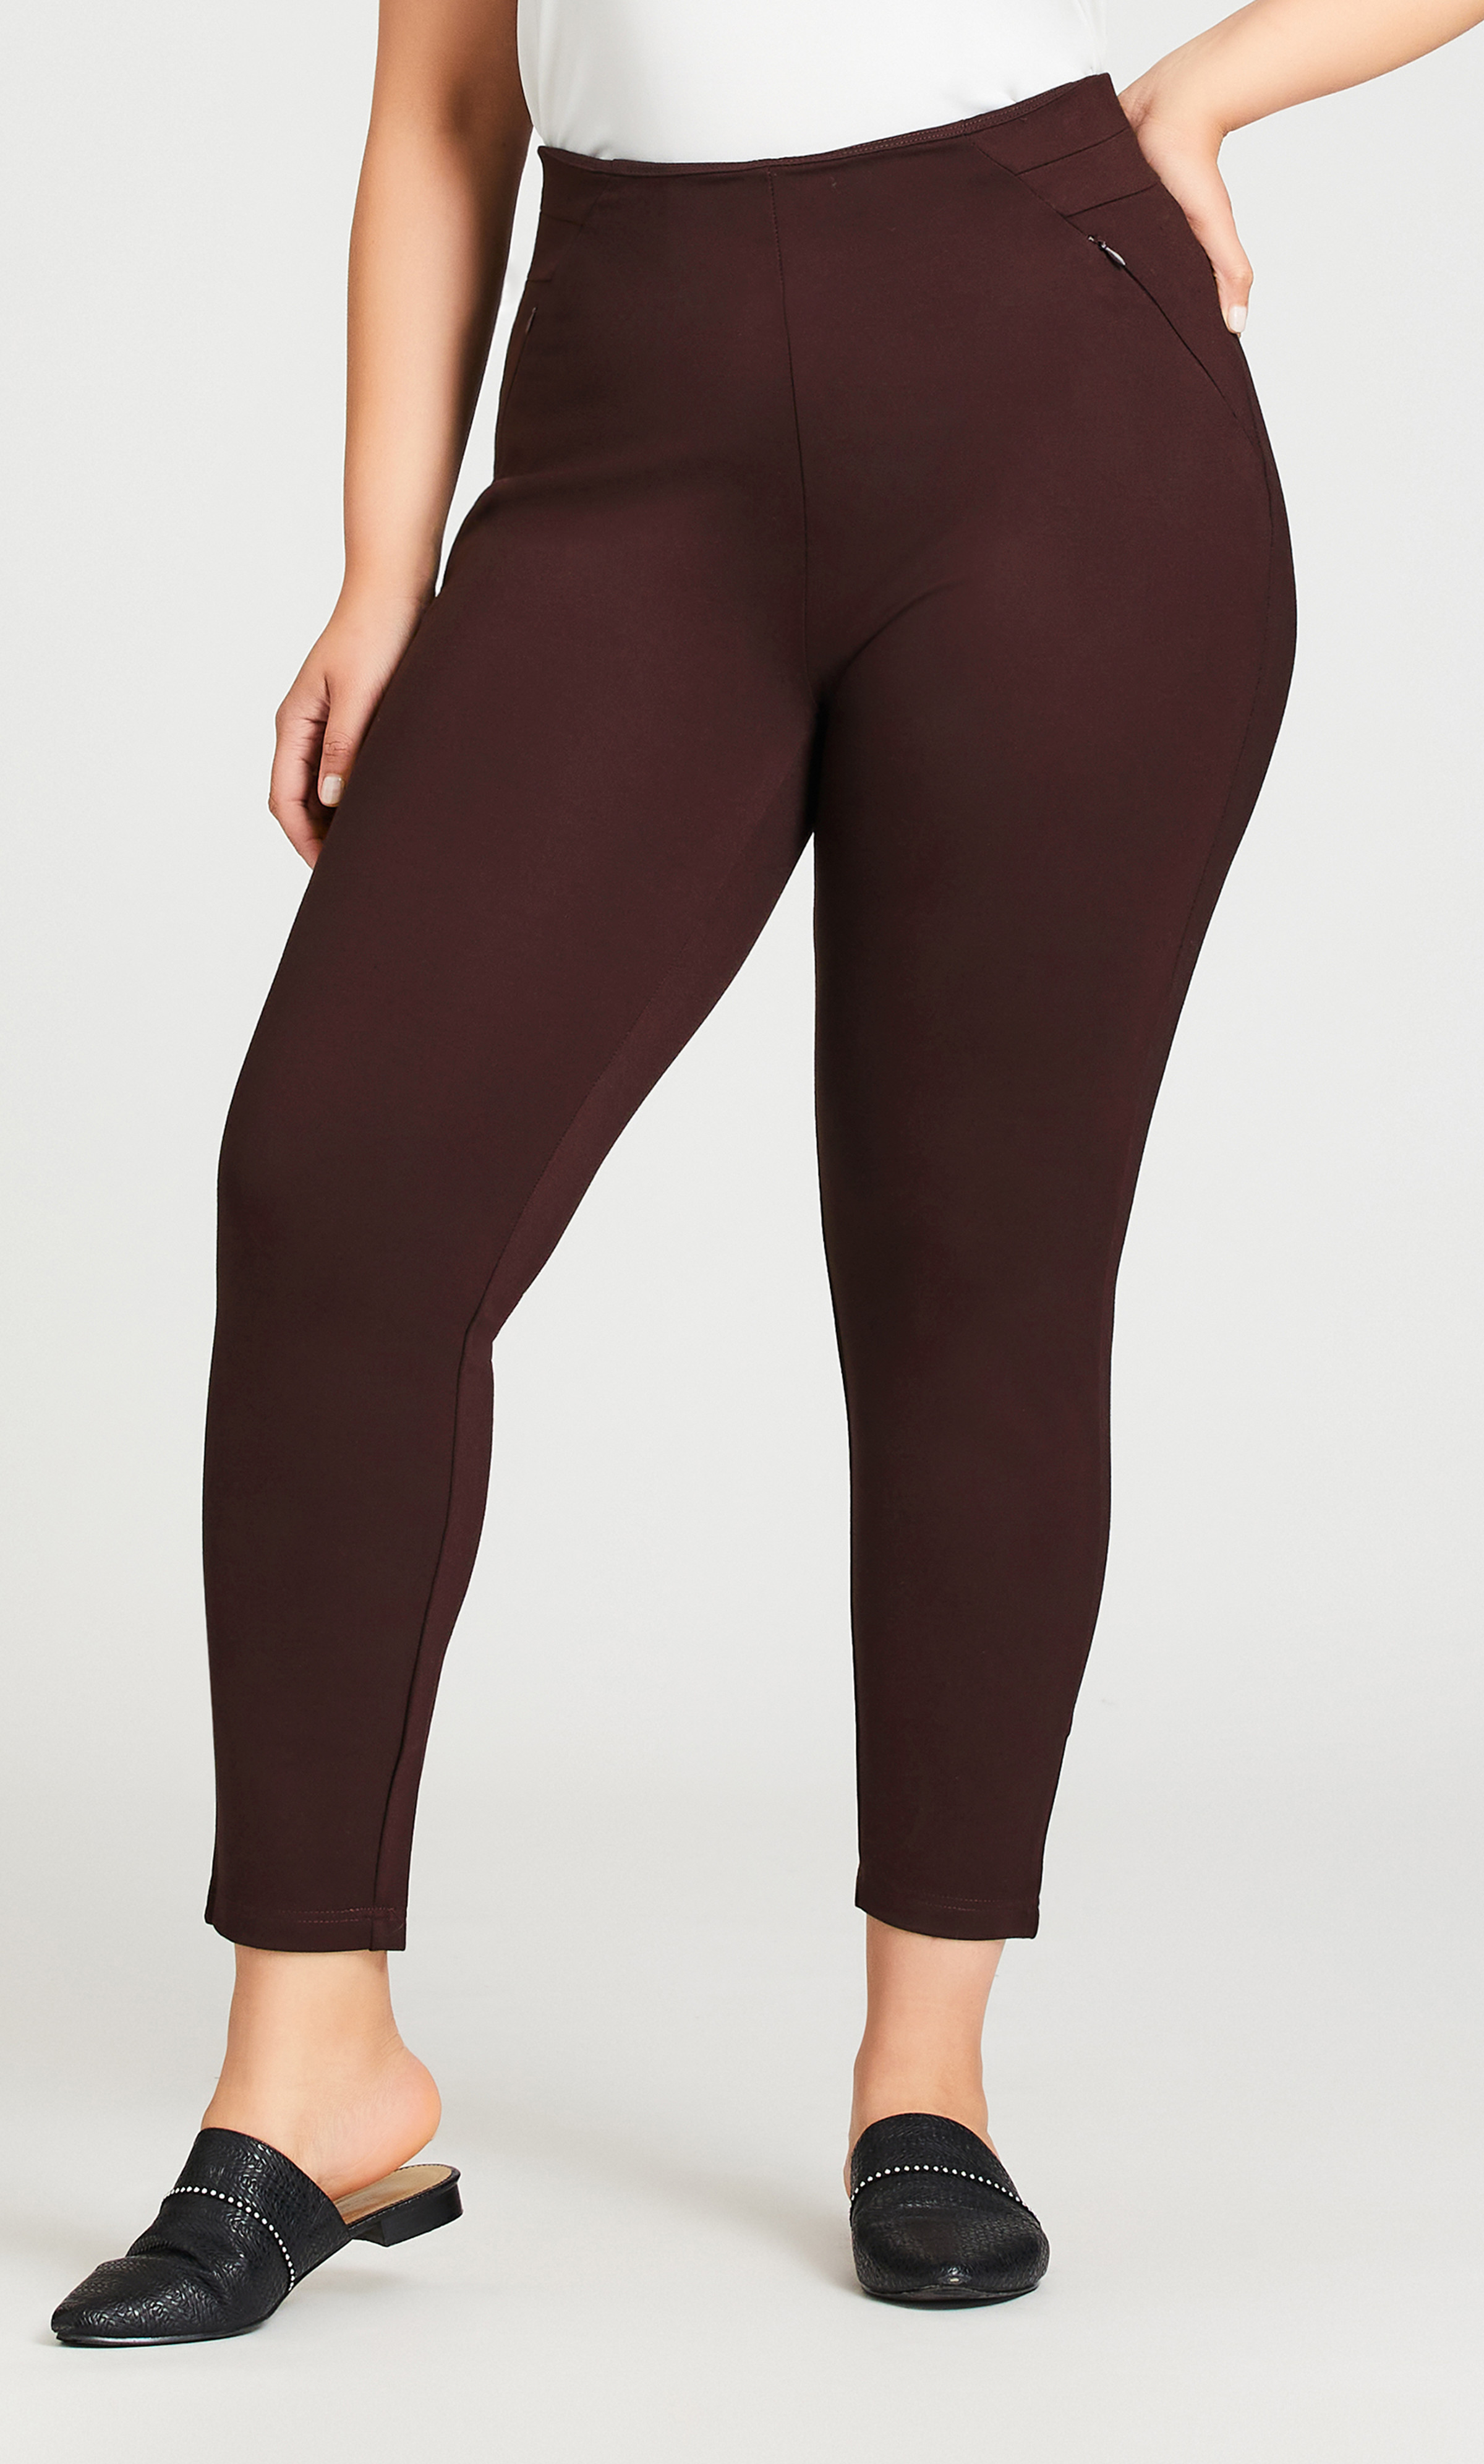 ShapeMove™ Pocket-detail sports tights - Brown - Ladies | H&M IN